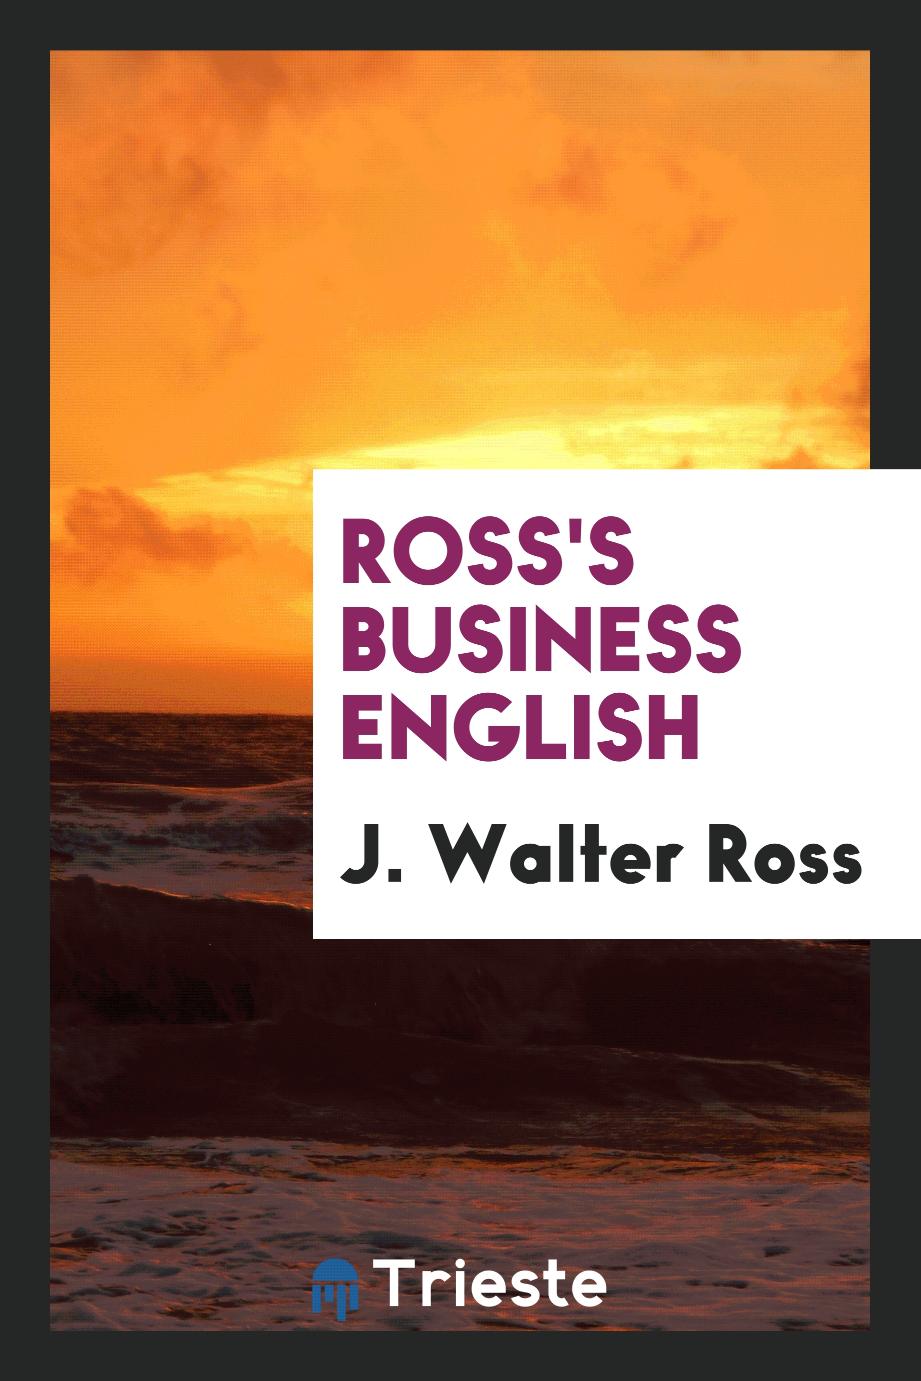 Ross's business English